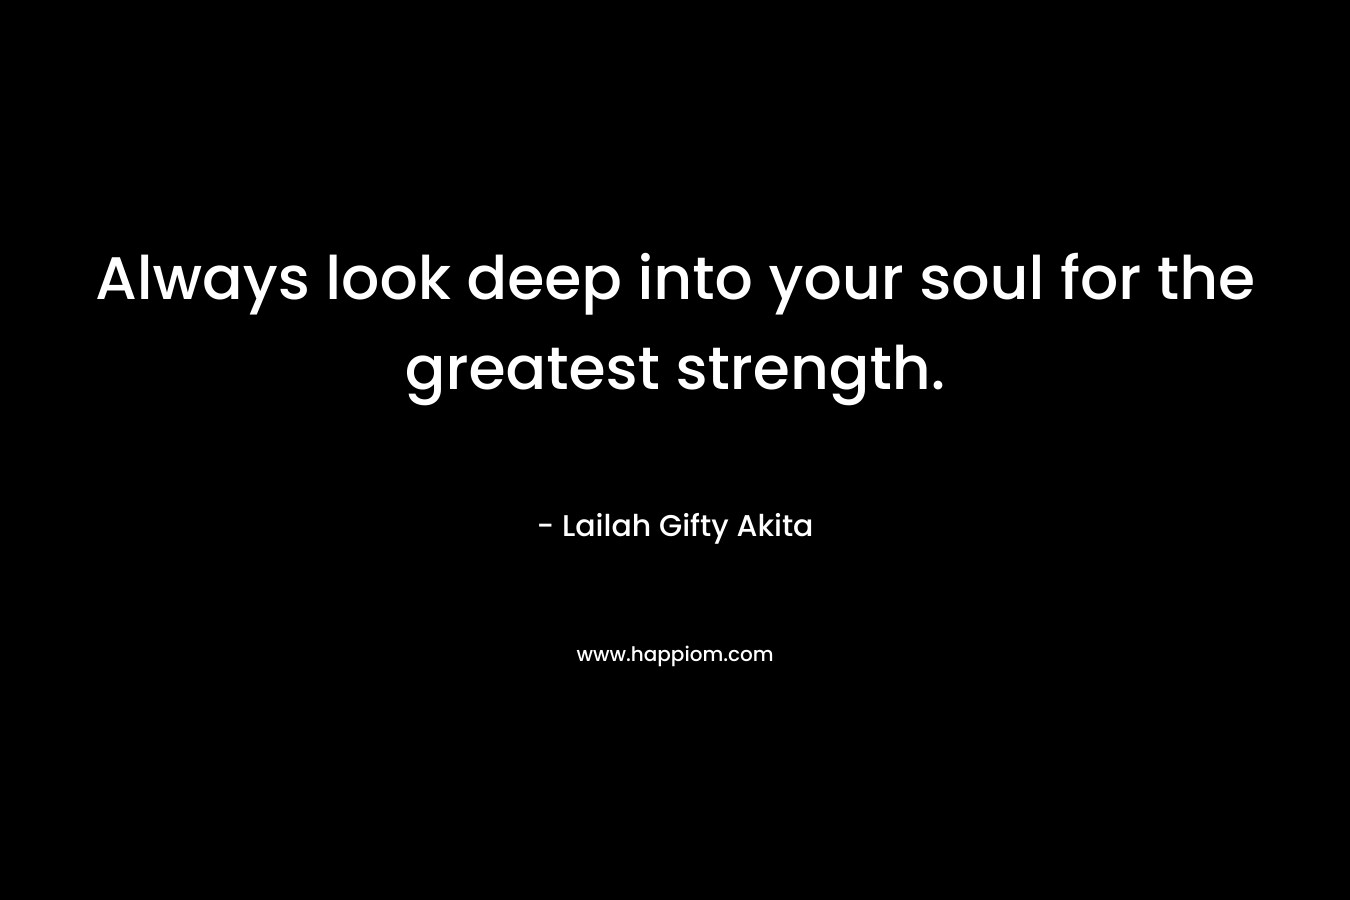 Always look deep into your soul for the greatest strength.